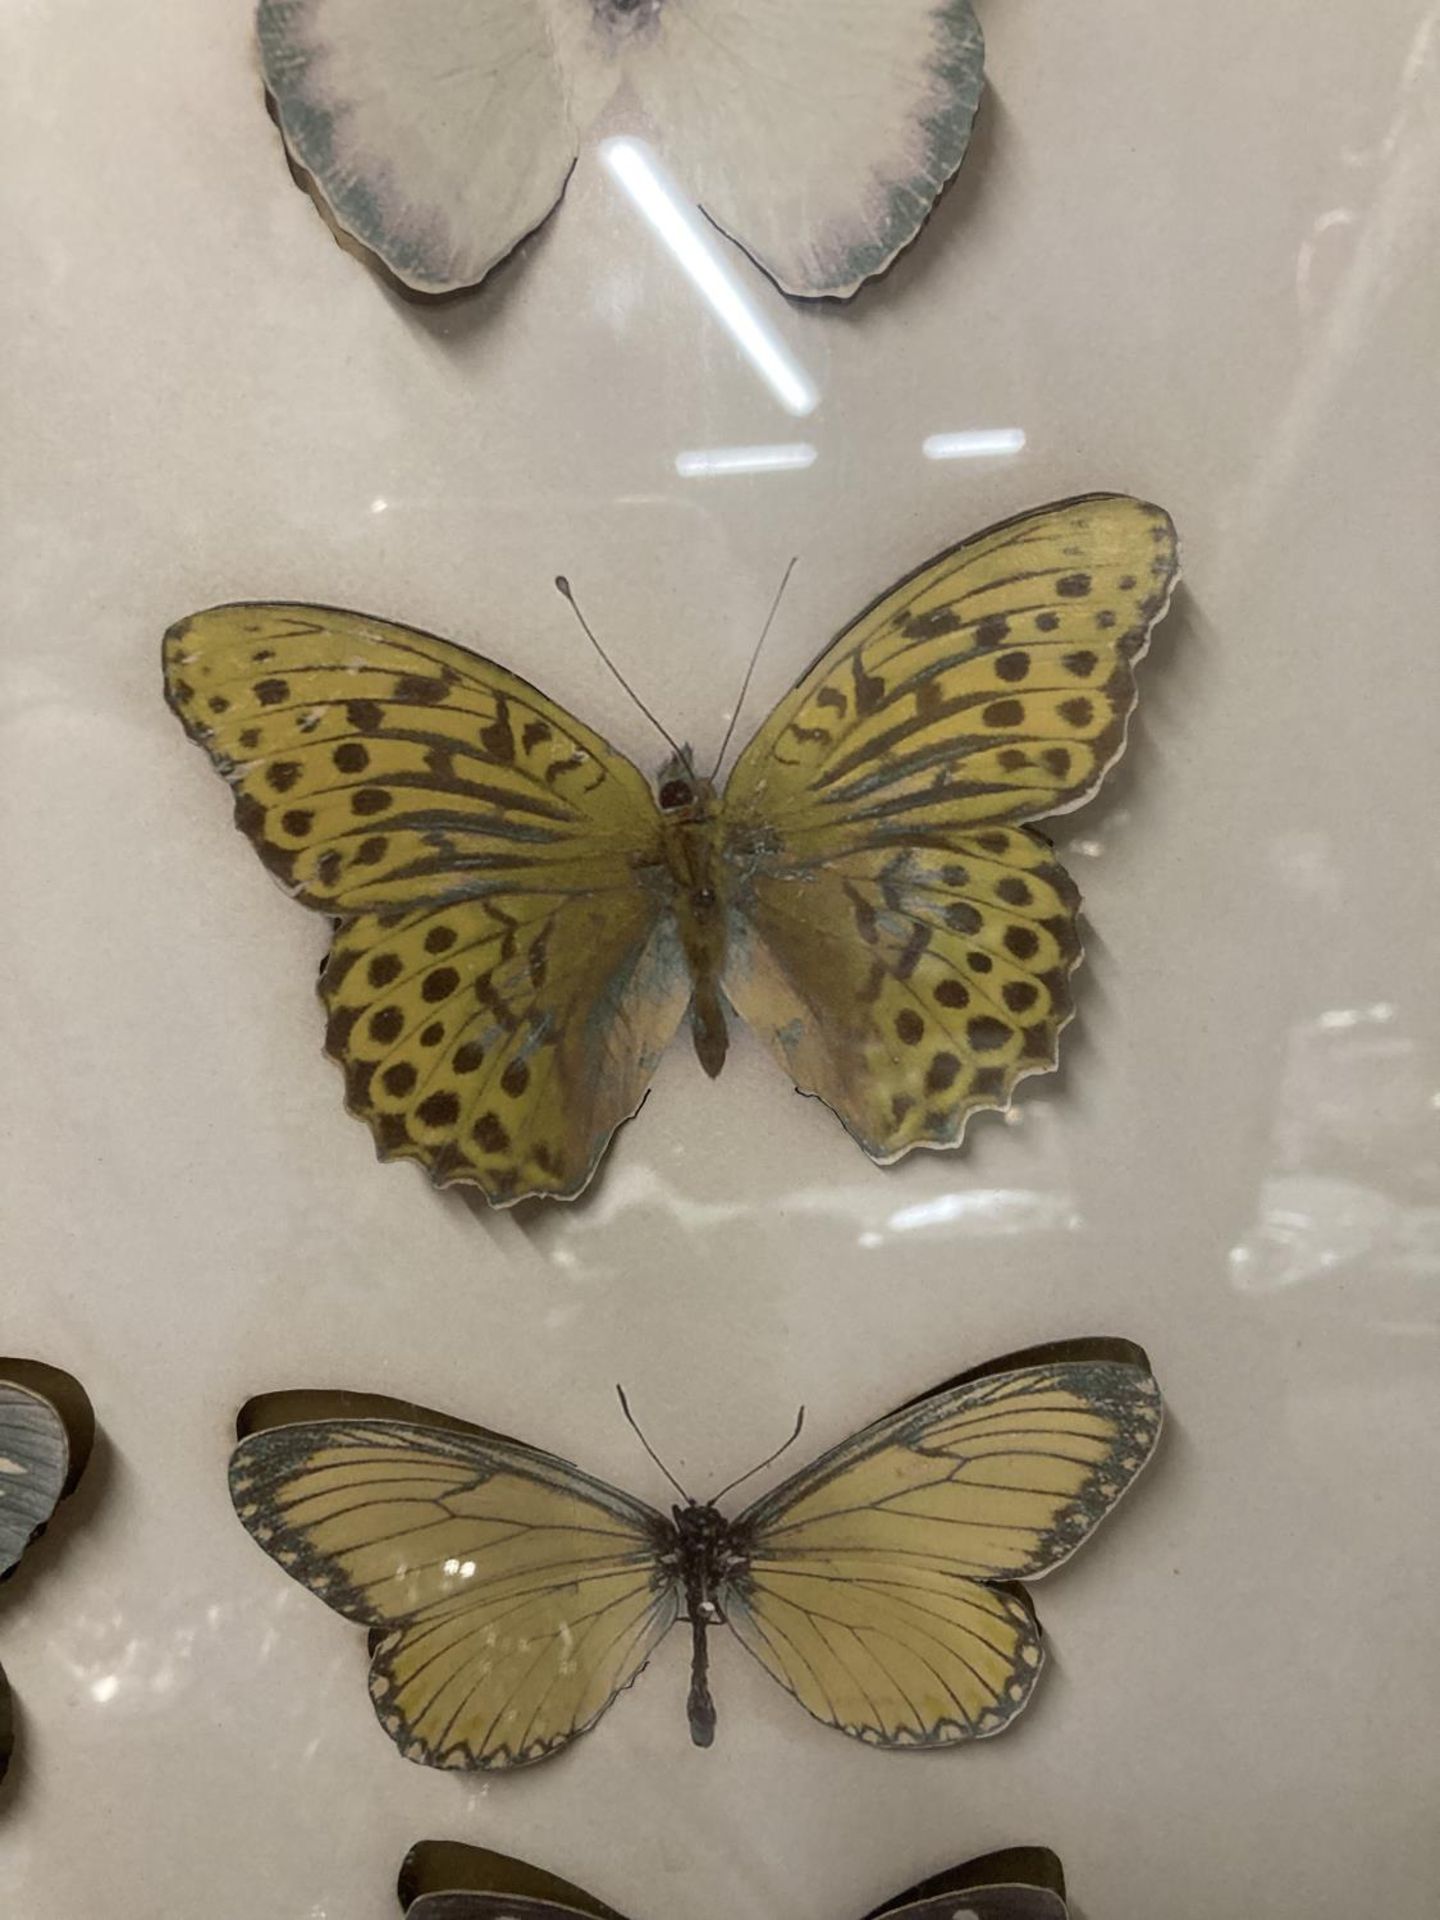 A WALL MOUNTED CASE CONTAINING 3-D CARDBOARD BUTTERFLIES - Image 4 of 4